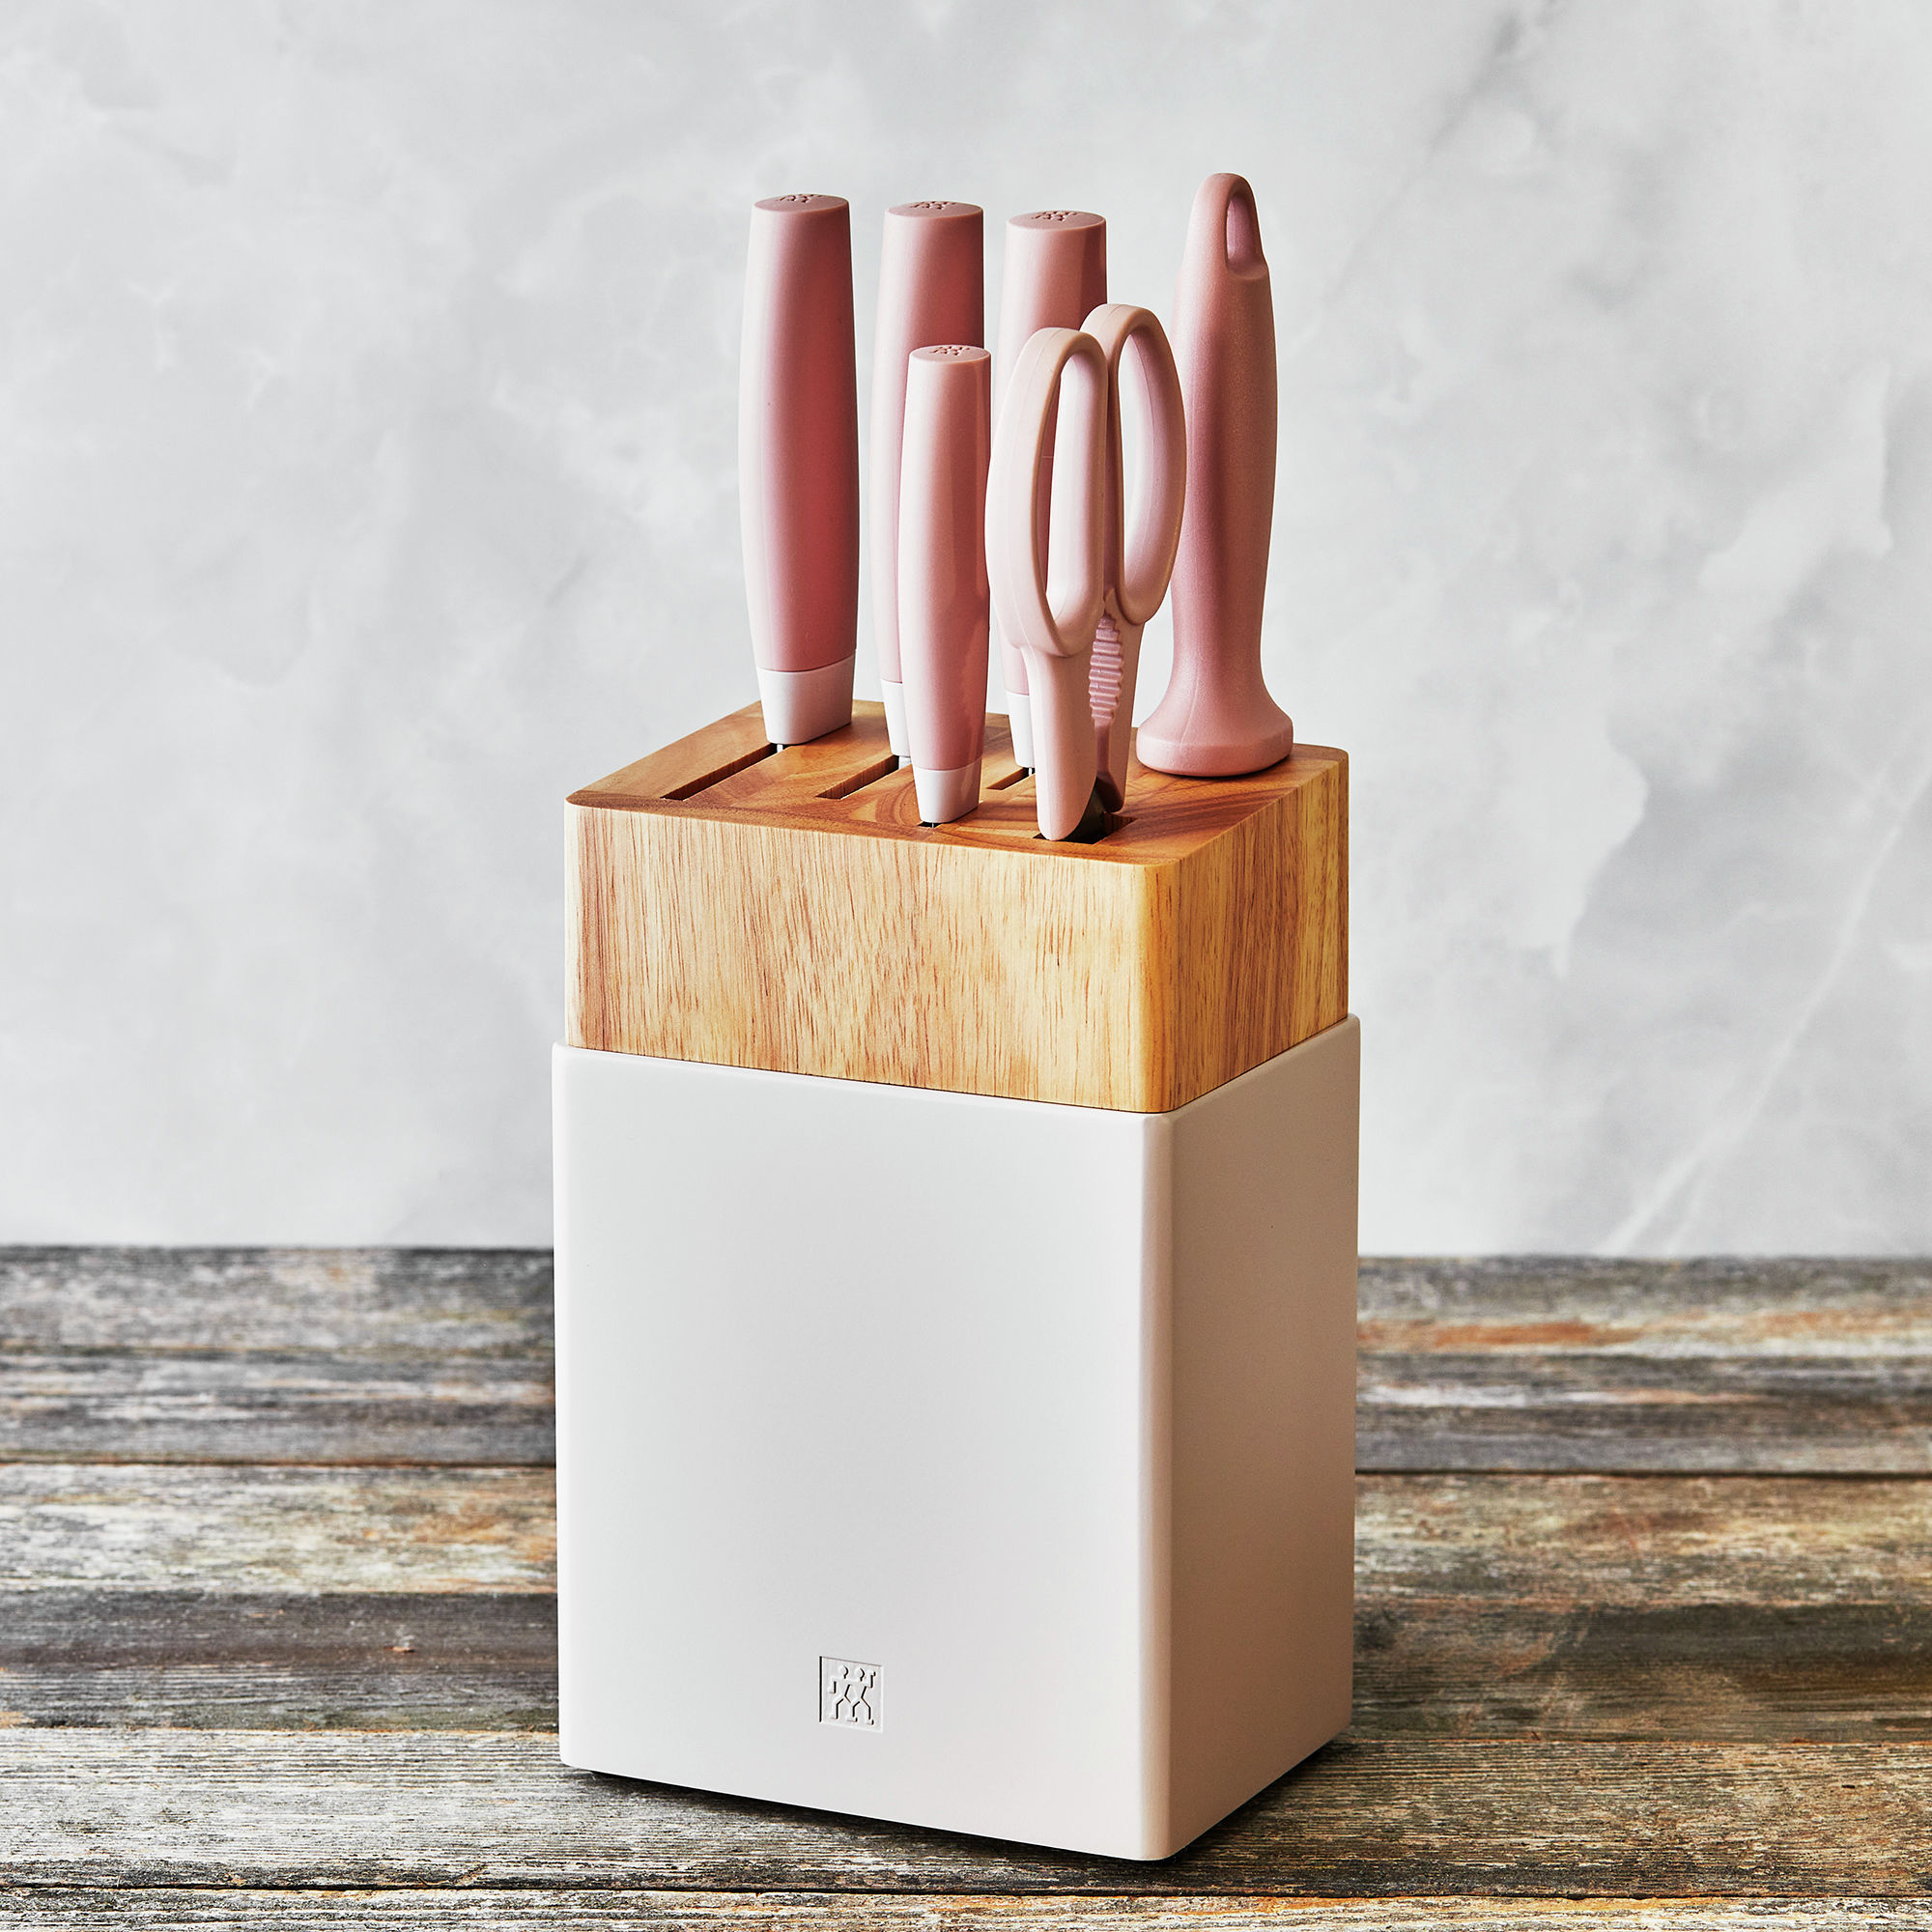 ZWILLING Now S Knife Block Set 